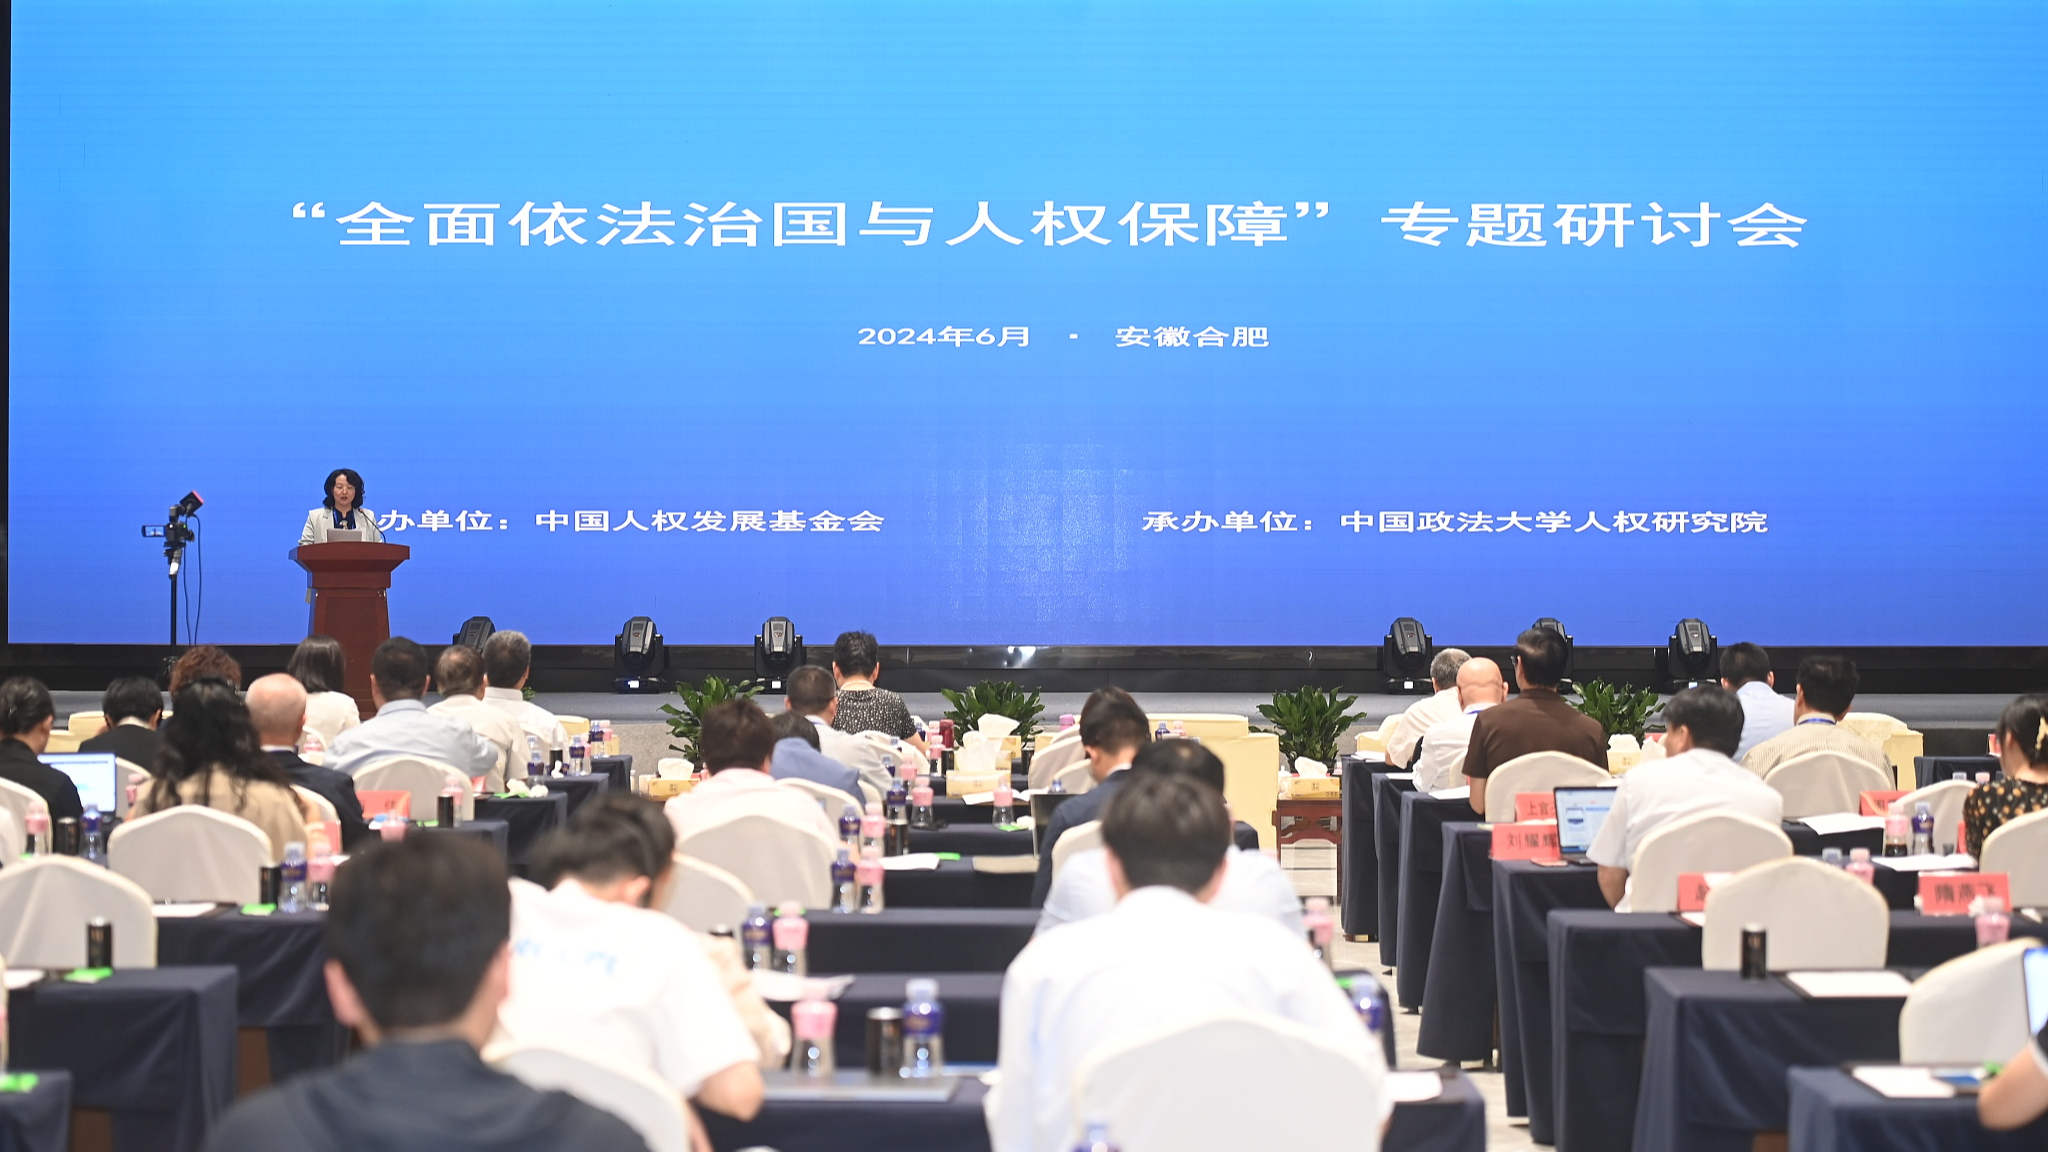 A seminar on China's law-based governance and human rights protection is held in Hefei, east China's Anhui Province, June 21, 2024. /CFP